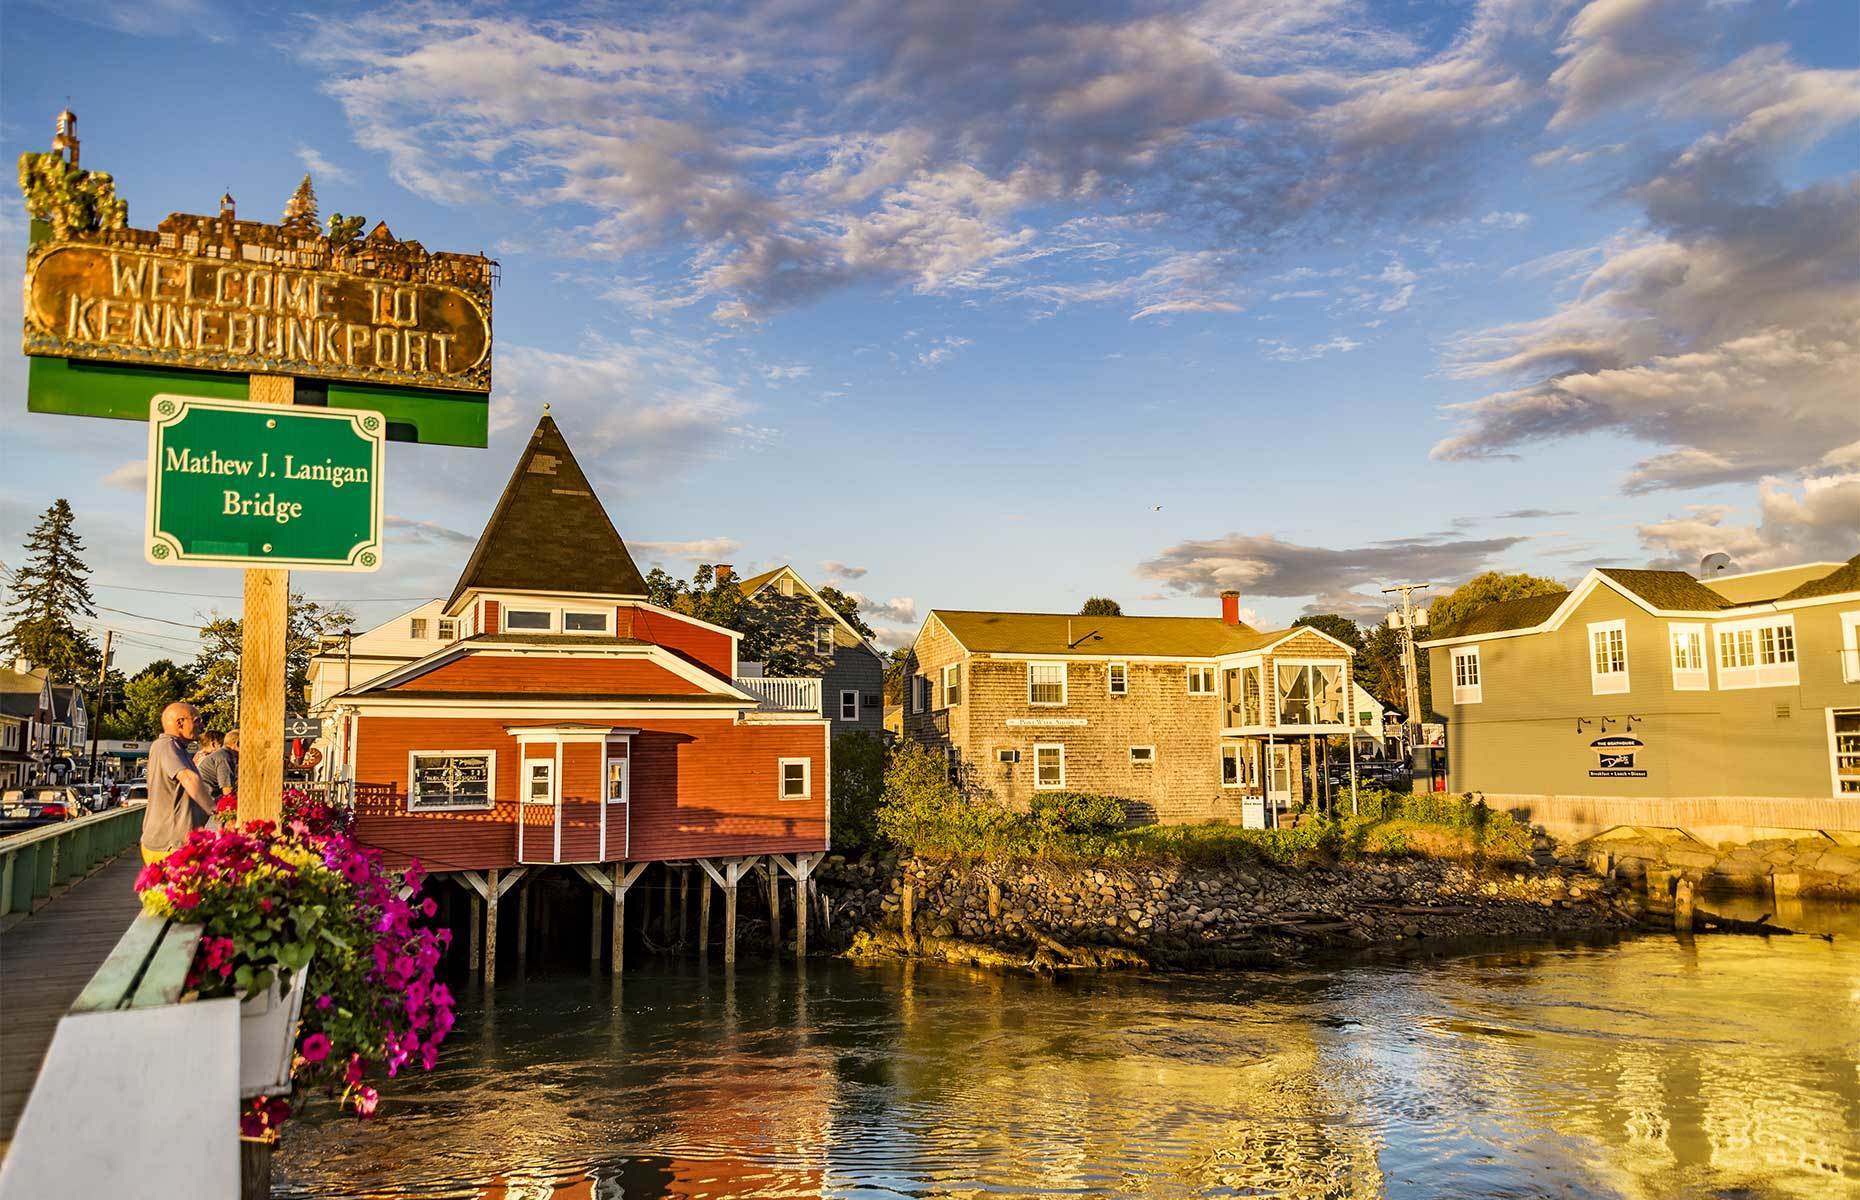 <p class="p1"><span>Visitors can’t help but slow their pace when exploring the seaside community of <a href="http://visitkennebunkport.com/" rel="noreferrer noopener"><span>Kennebunkport</span></a>. Take time to enjoy a leisurely stroll. Delight in wandering through each and every one of Kennebunkport’s small boutiques.</span></p>